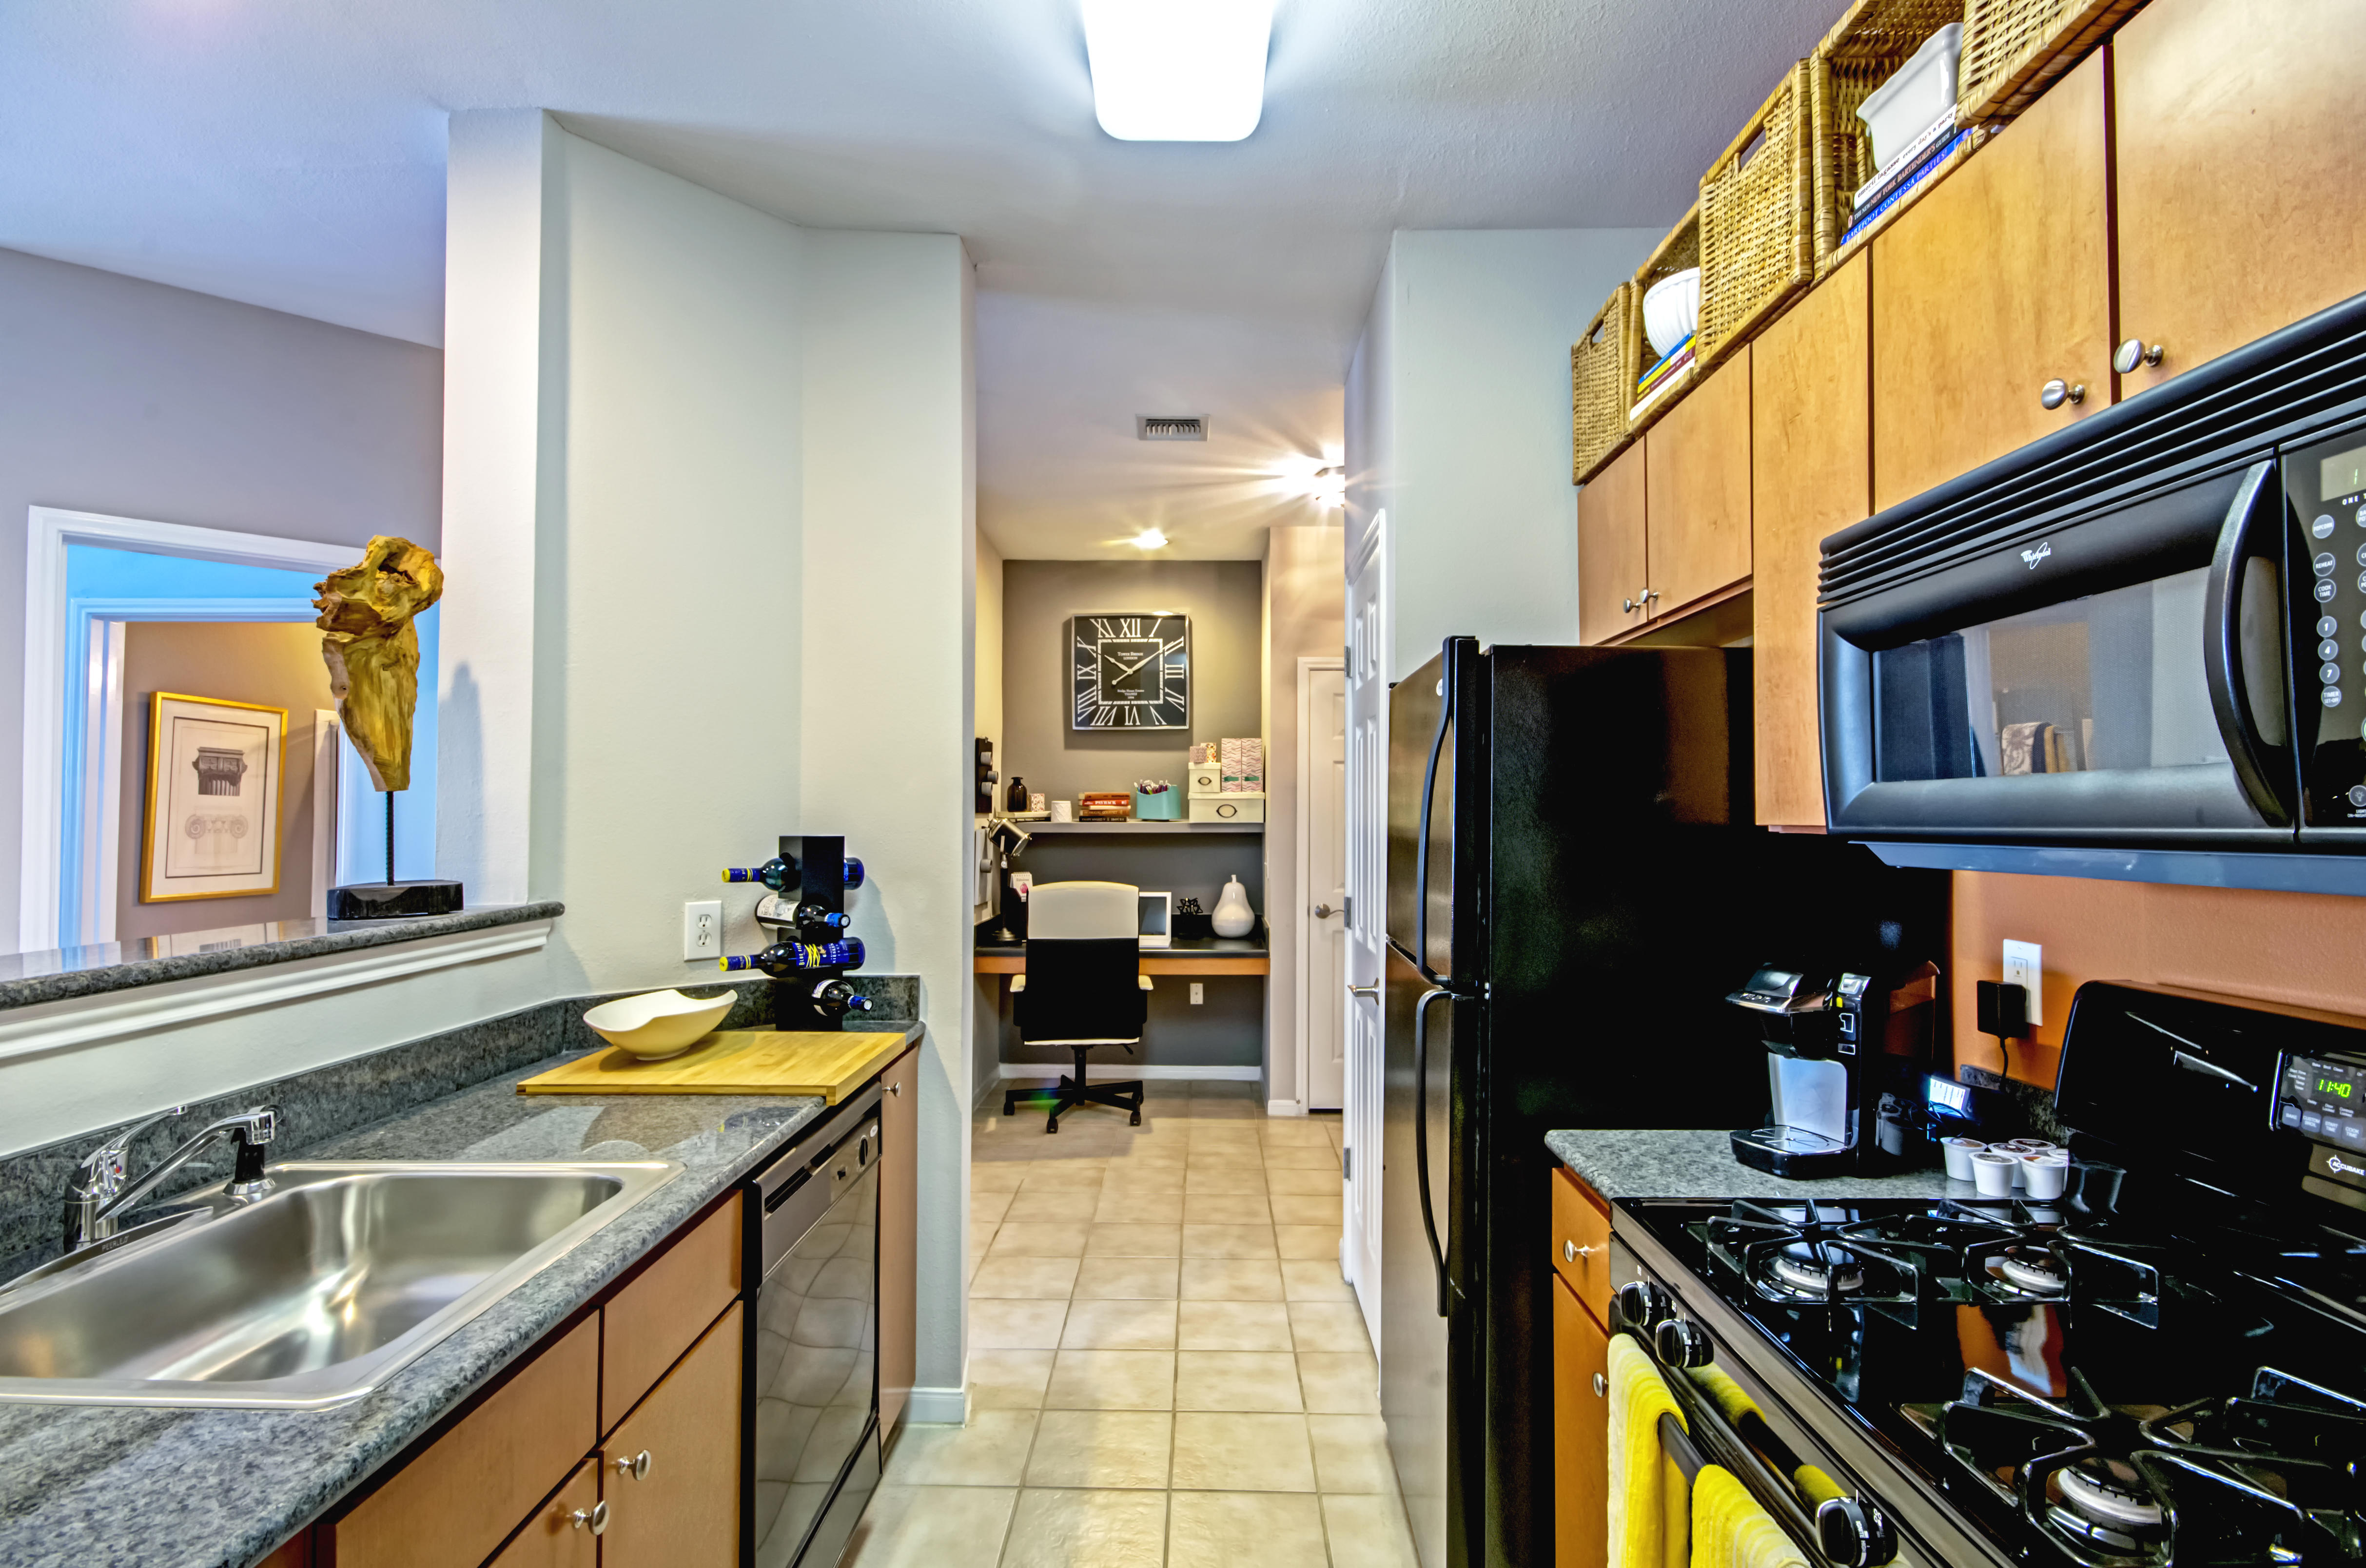 Enjoy cooking with a gas range stovetop in our galley style kitchen